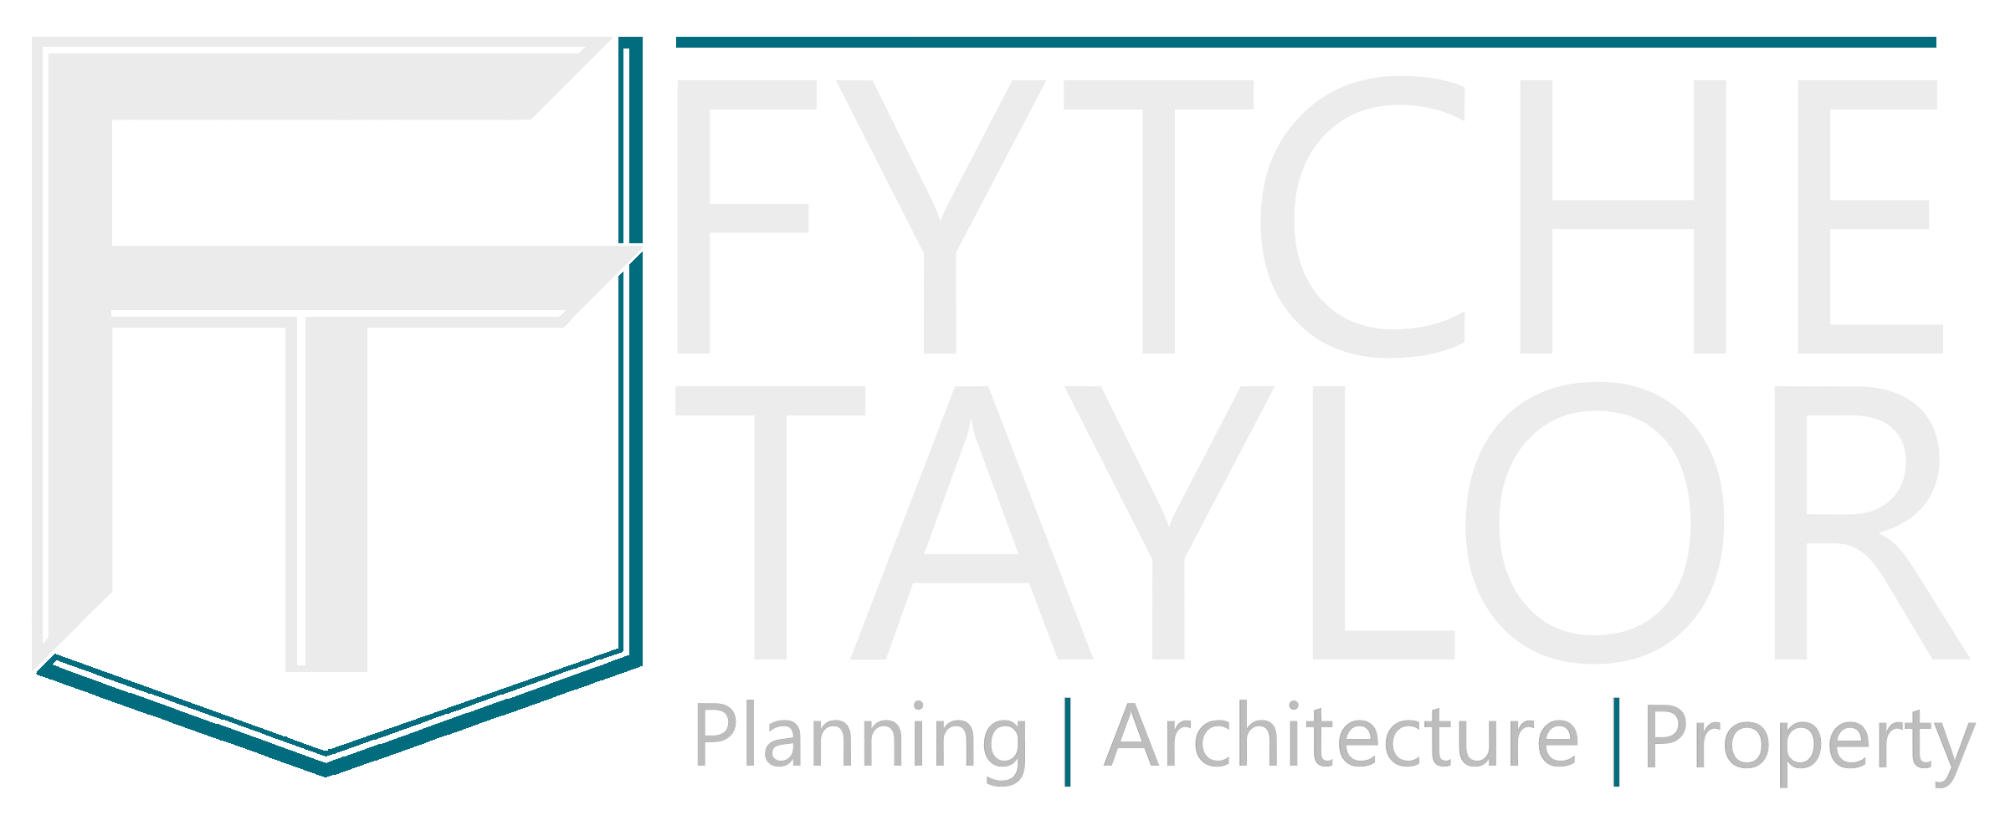 FYTCHE-TAYLOR Planning | Architecture | Property  - Top rated development consultants. Assistance with planning applications. Based in Lincoln with clients UK-wide